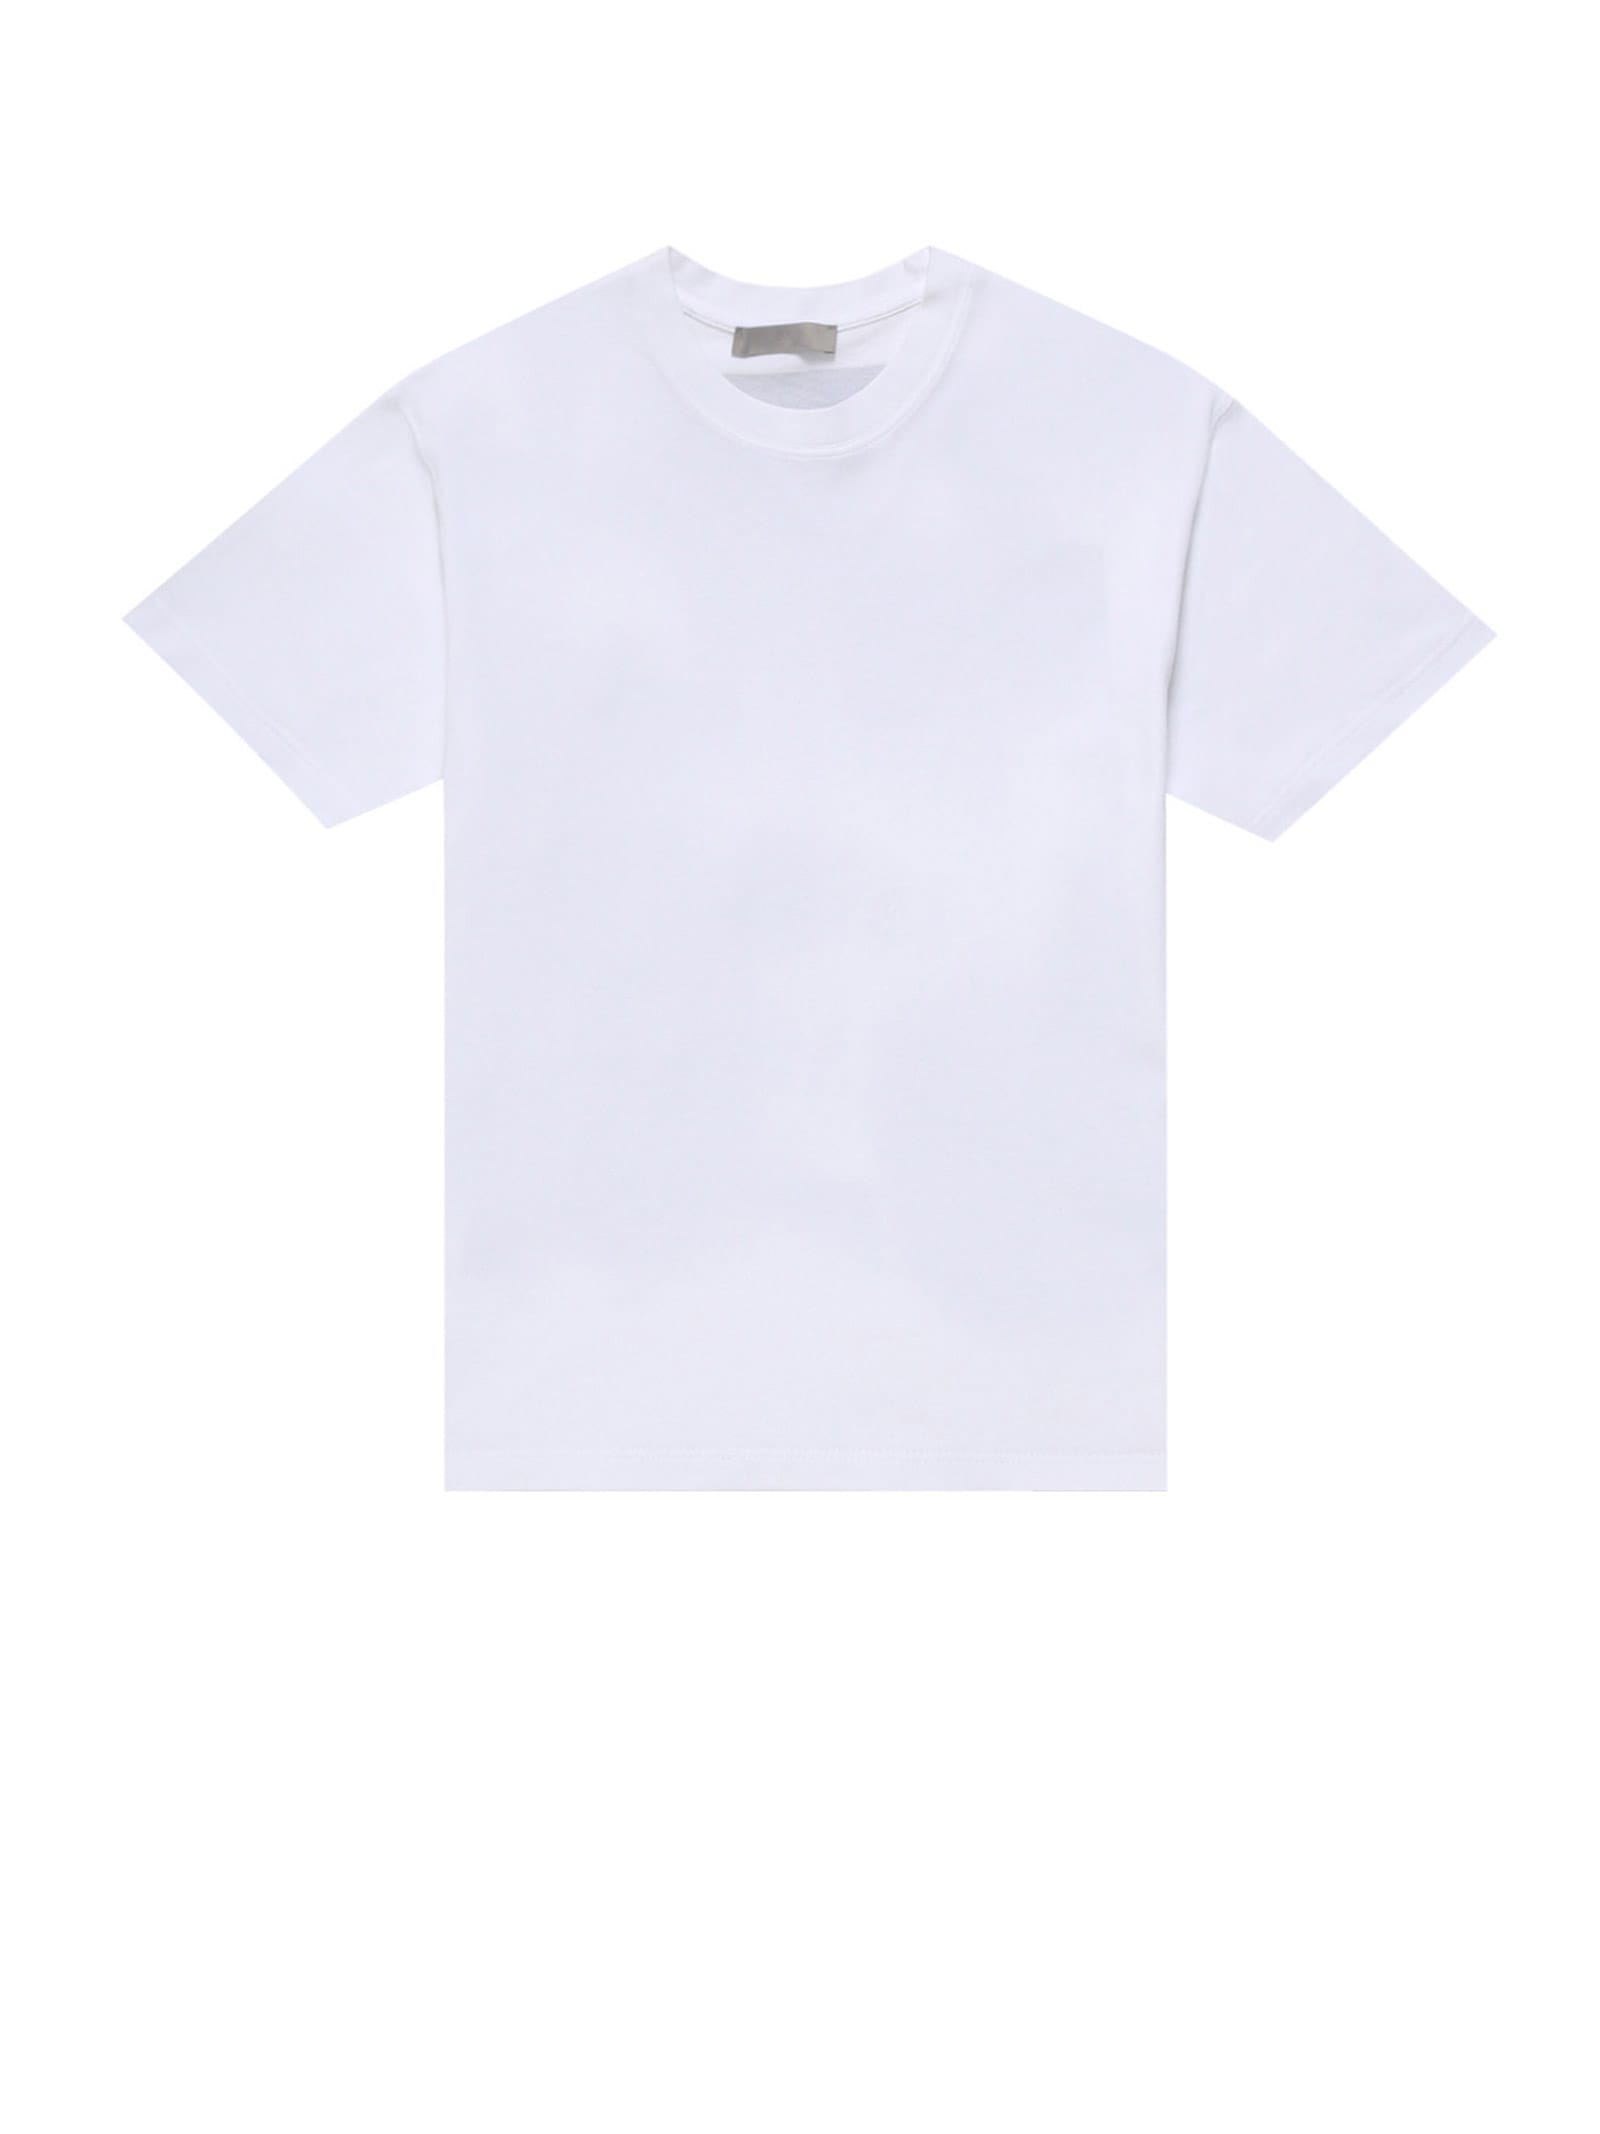 A-COLD-WALL A Cold Wall White T-shirt